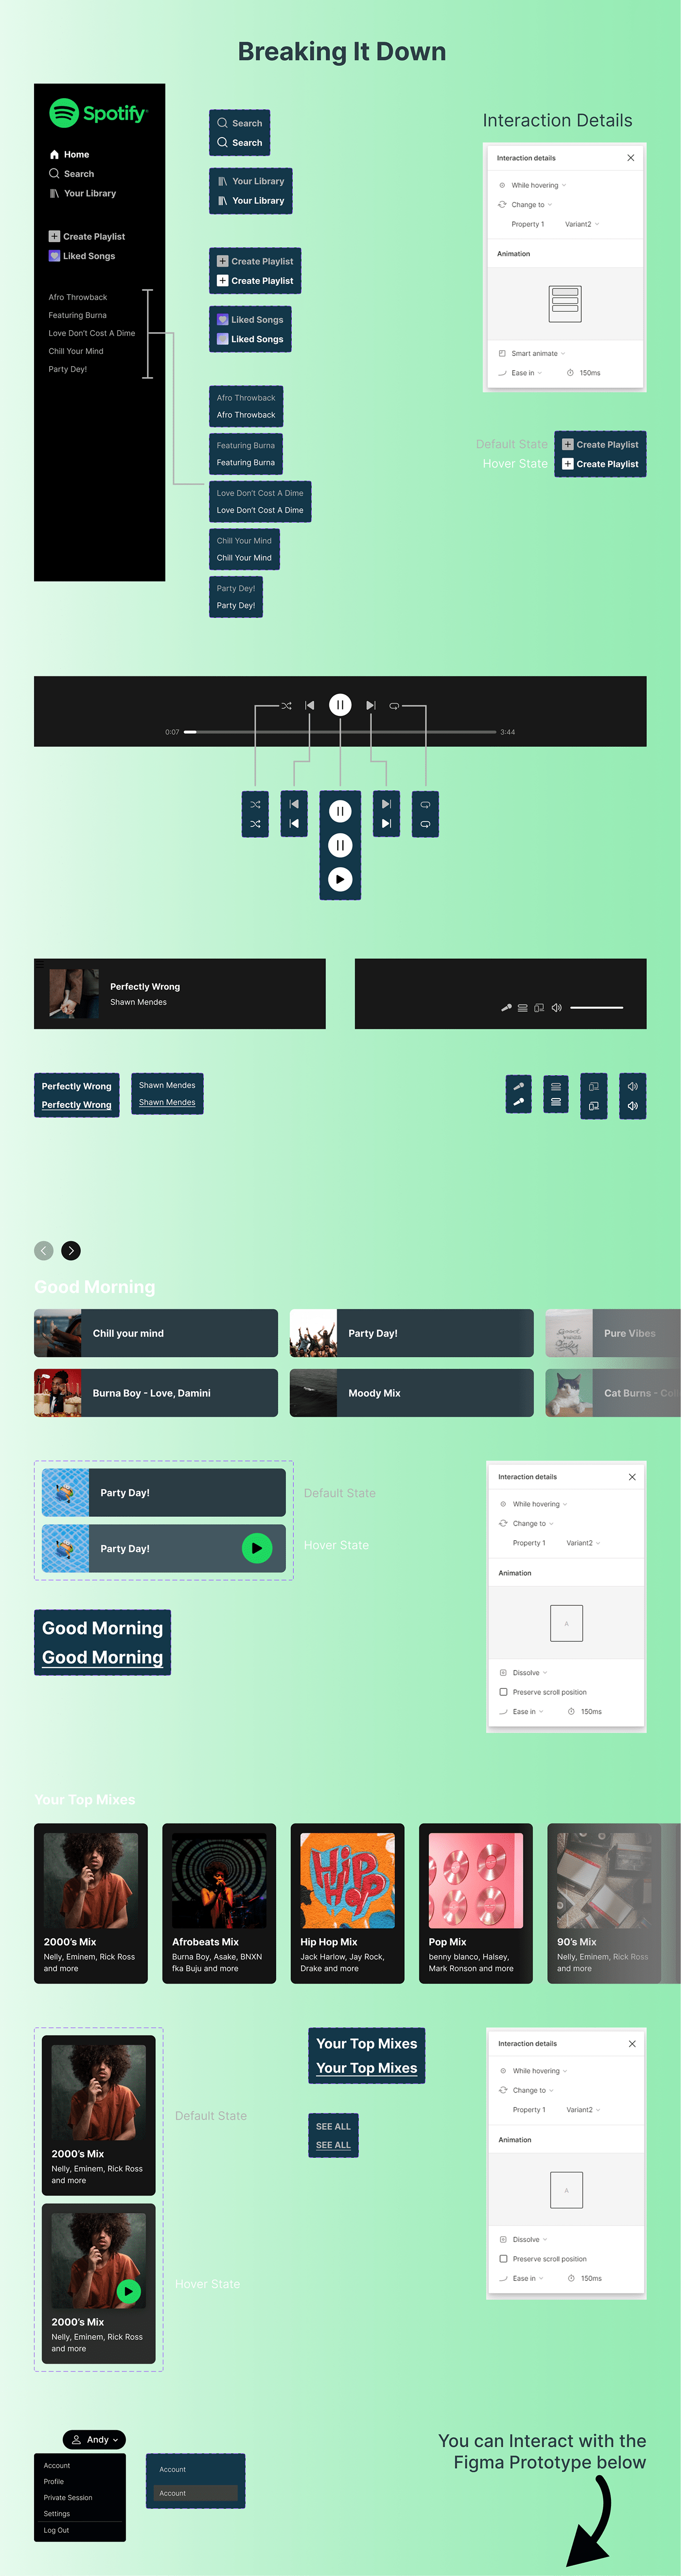 components Figma interaction Prototyping Protoype UI UI/UX uidesign user interface variants